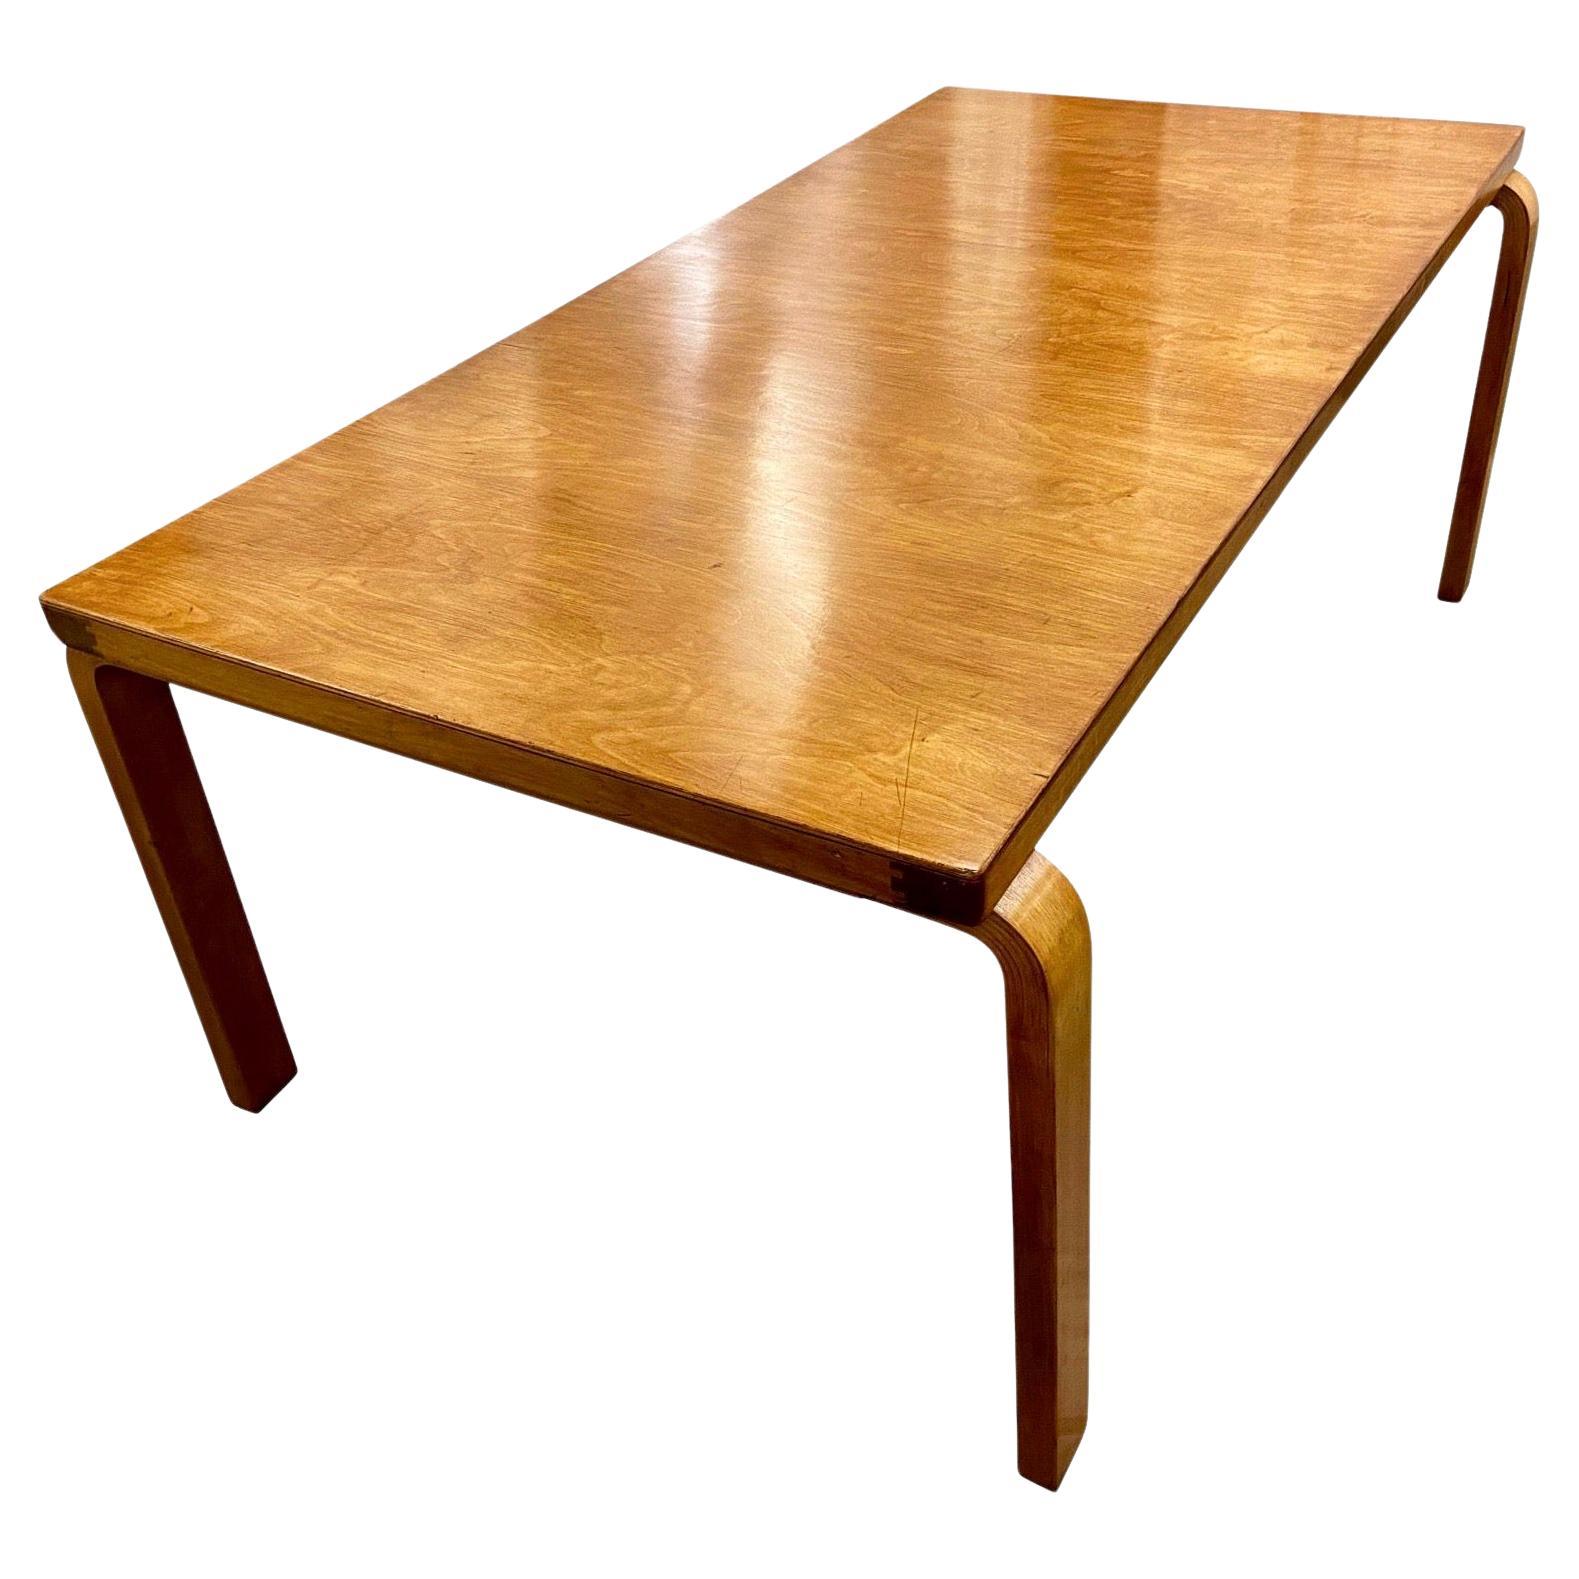 Rare large size original 1930's modernist early Alvar Aalto L-Leg plywood desk, dining, conference or library table. beautiful patina.
numbered legs and 1930's Finmar label.
Manufactured by O.y. Huonekalu-ja Rakennustyotehdas A.b., Turku, Finland